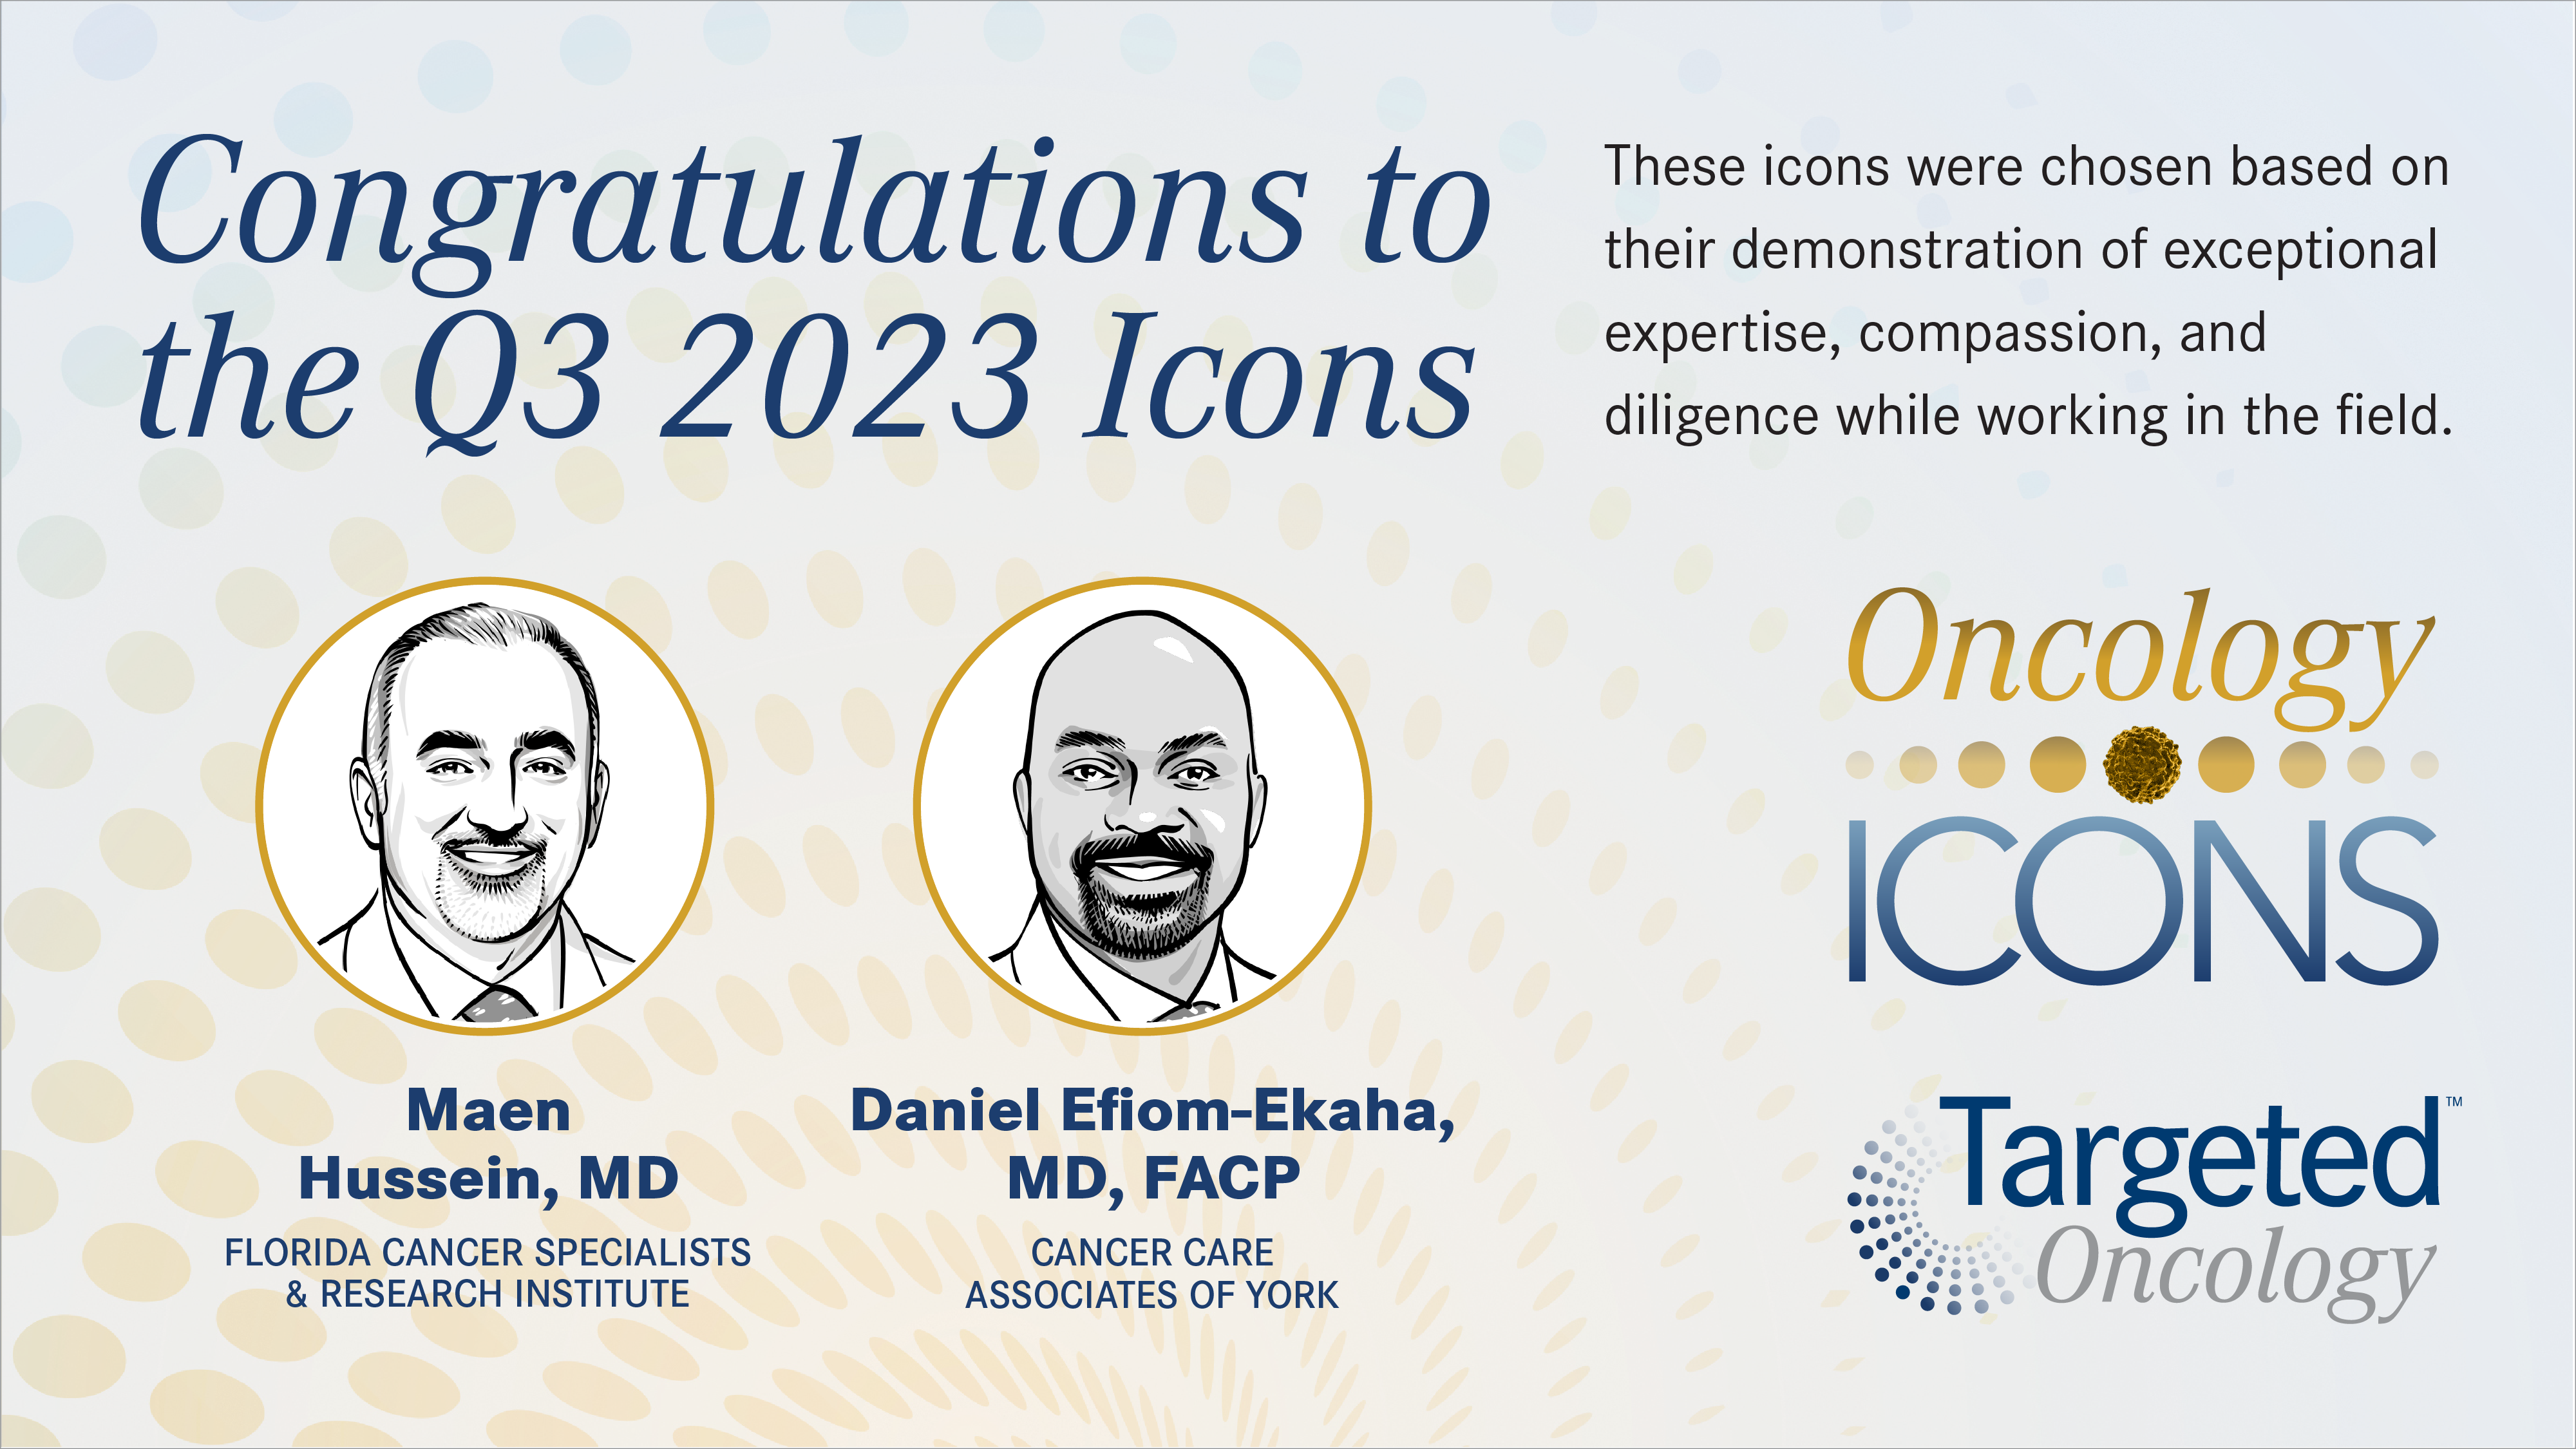 Targeted Oncology announces recipients of its Oncology Icons award program